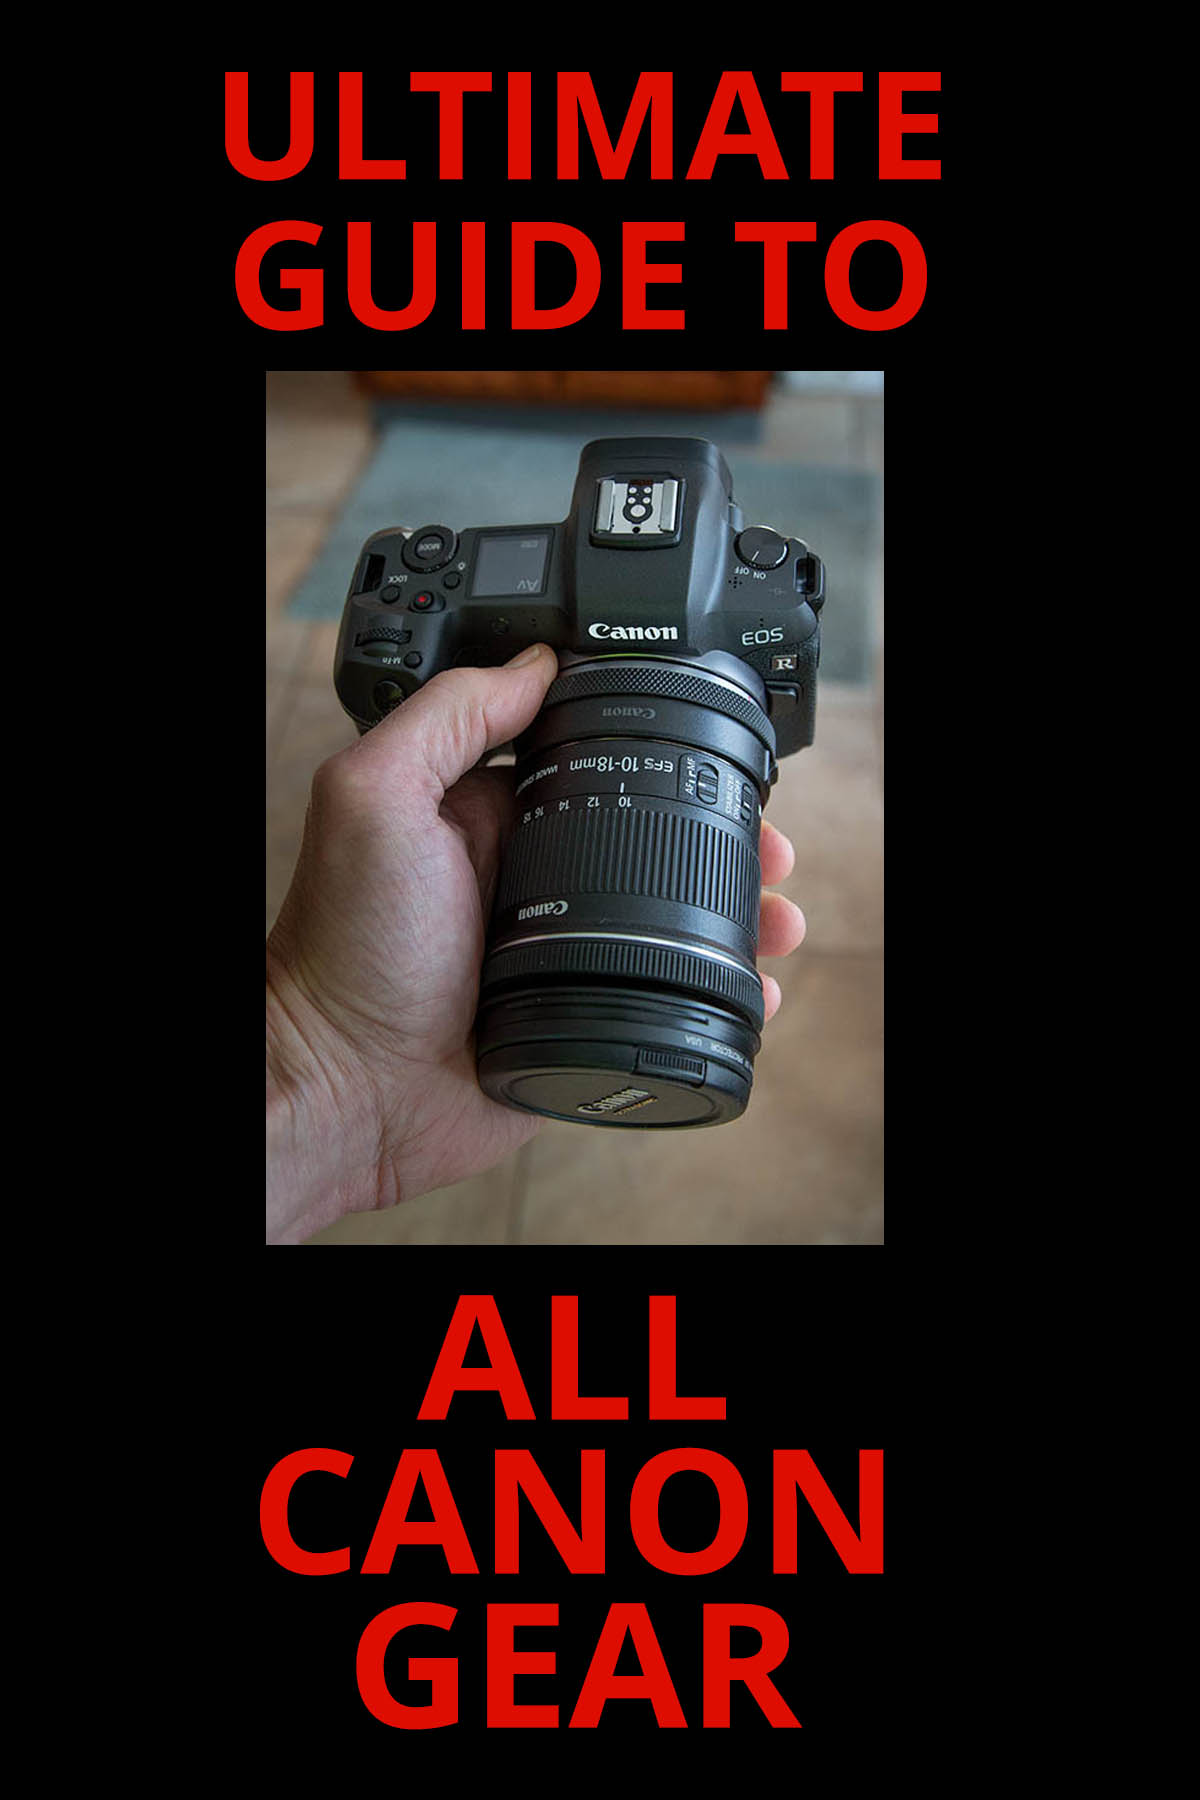 Guide to Camera Gear On Pinterest